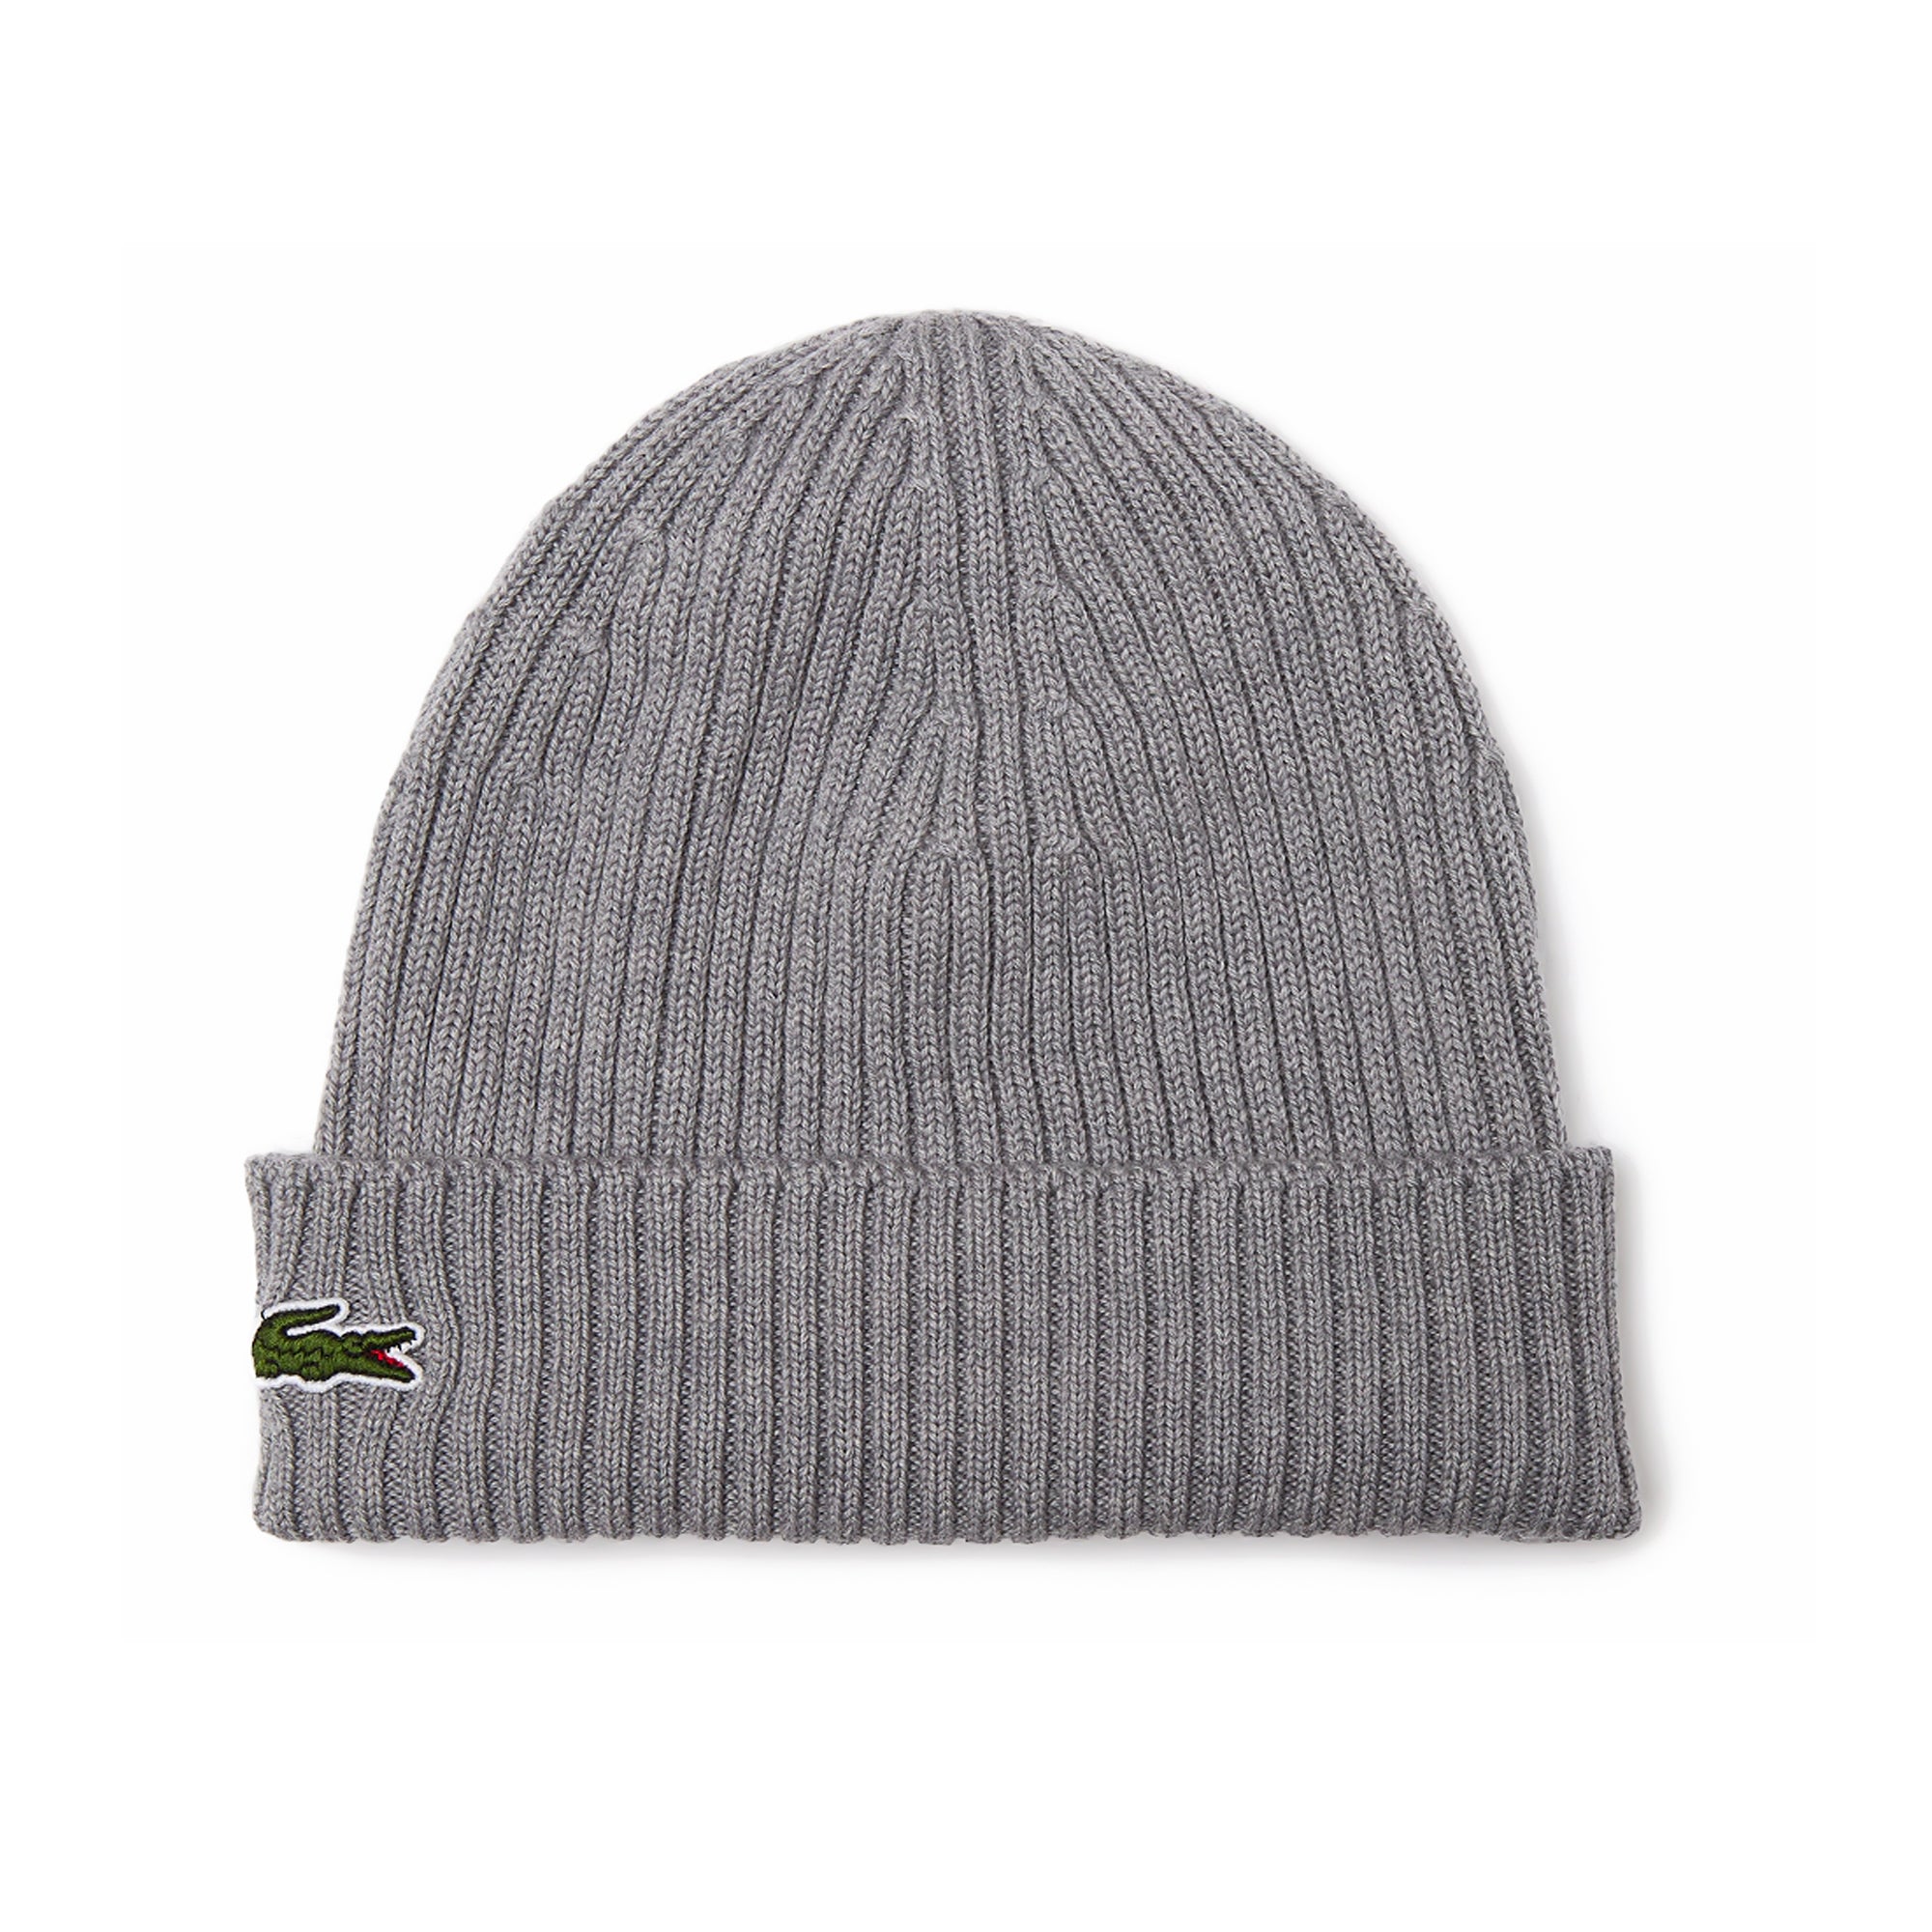 Lacoste RB0001 Knitted Wool Beanie - Heather Agate